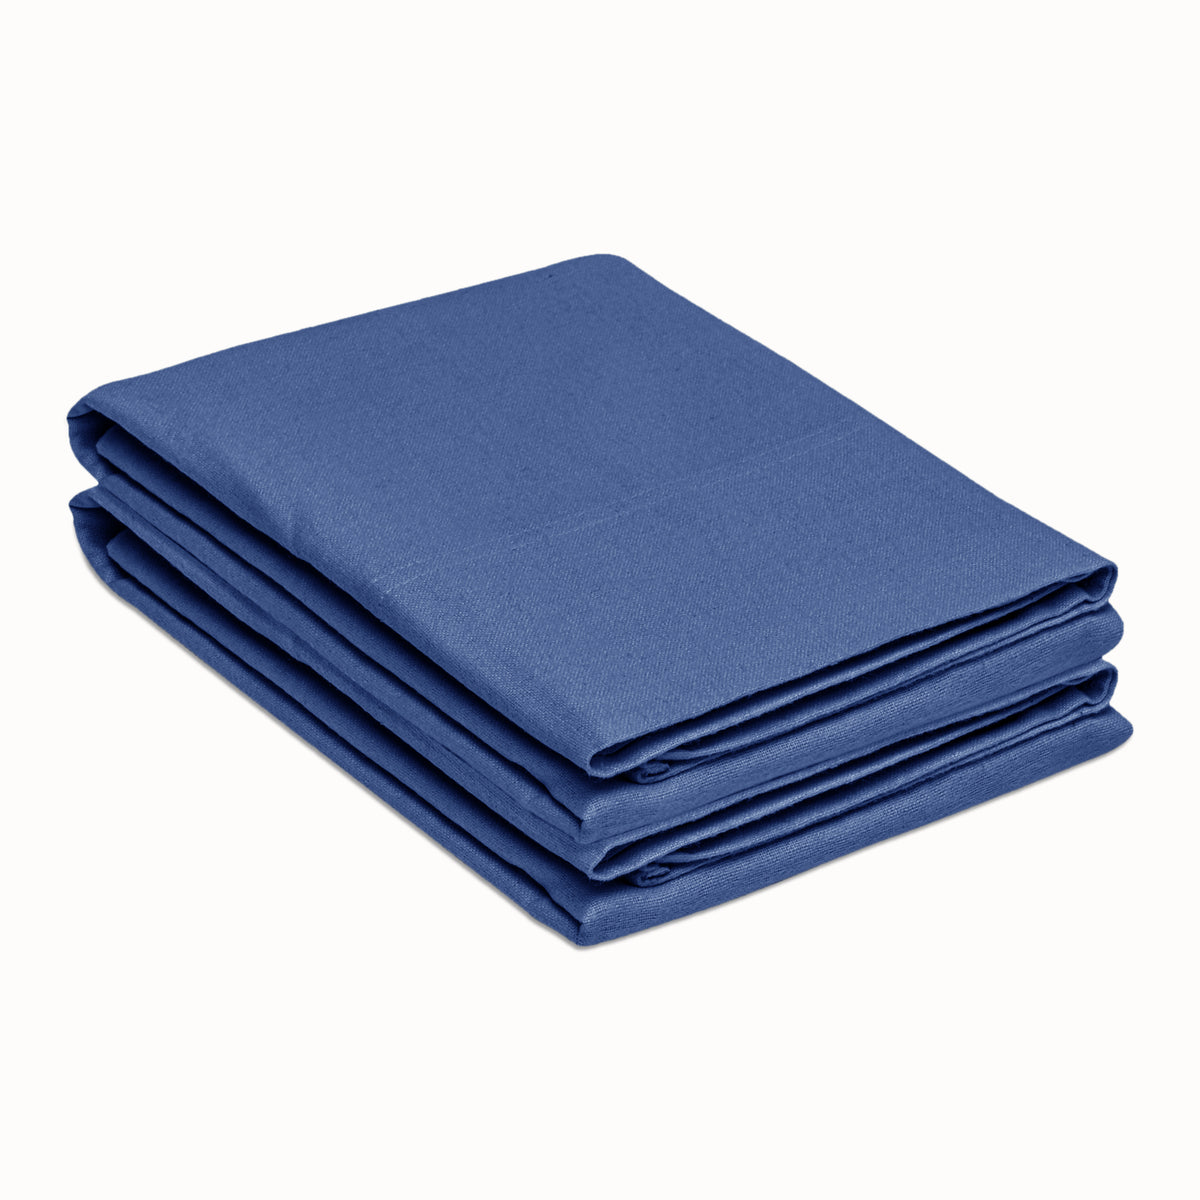 Solid Flannel Cotton Soft Fuzzy Pillowcases, Set of 2 - NavyBlue